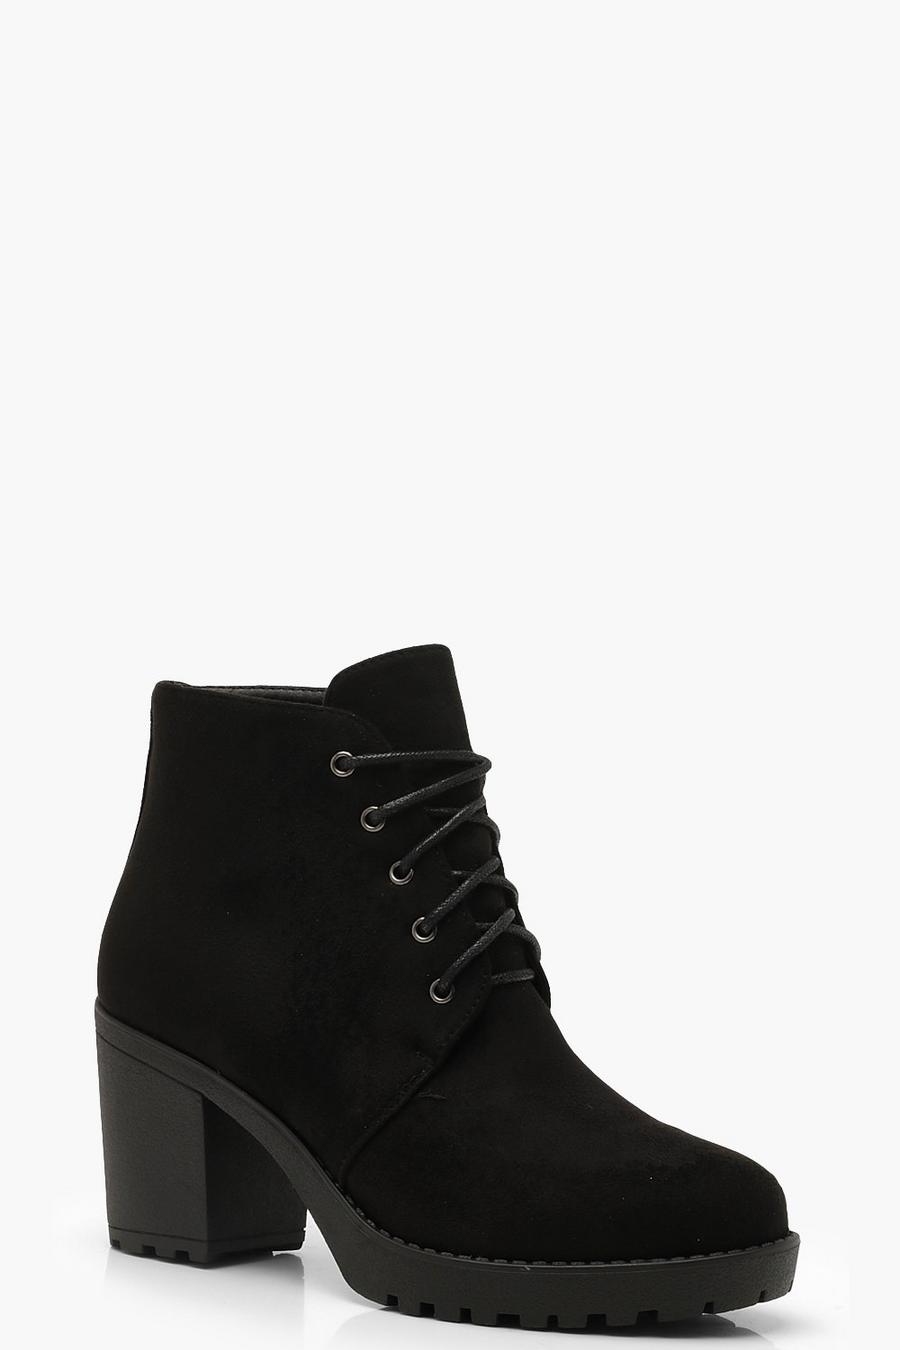 Black Lace Up Chunky Heel Combat Boots image number 1